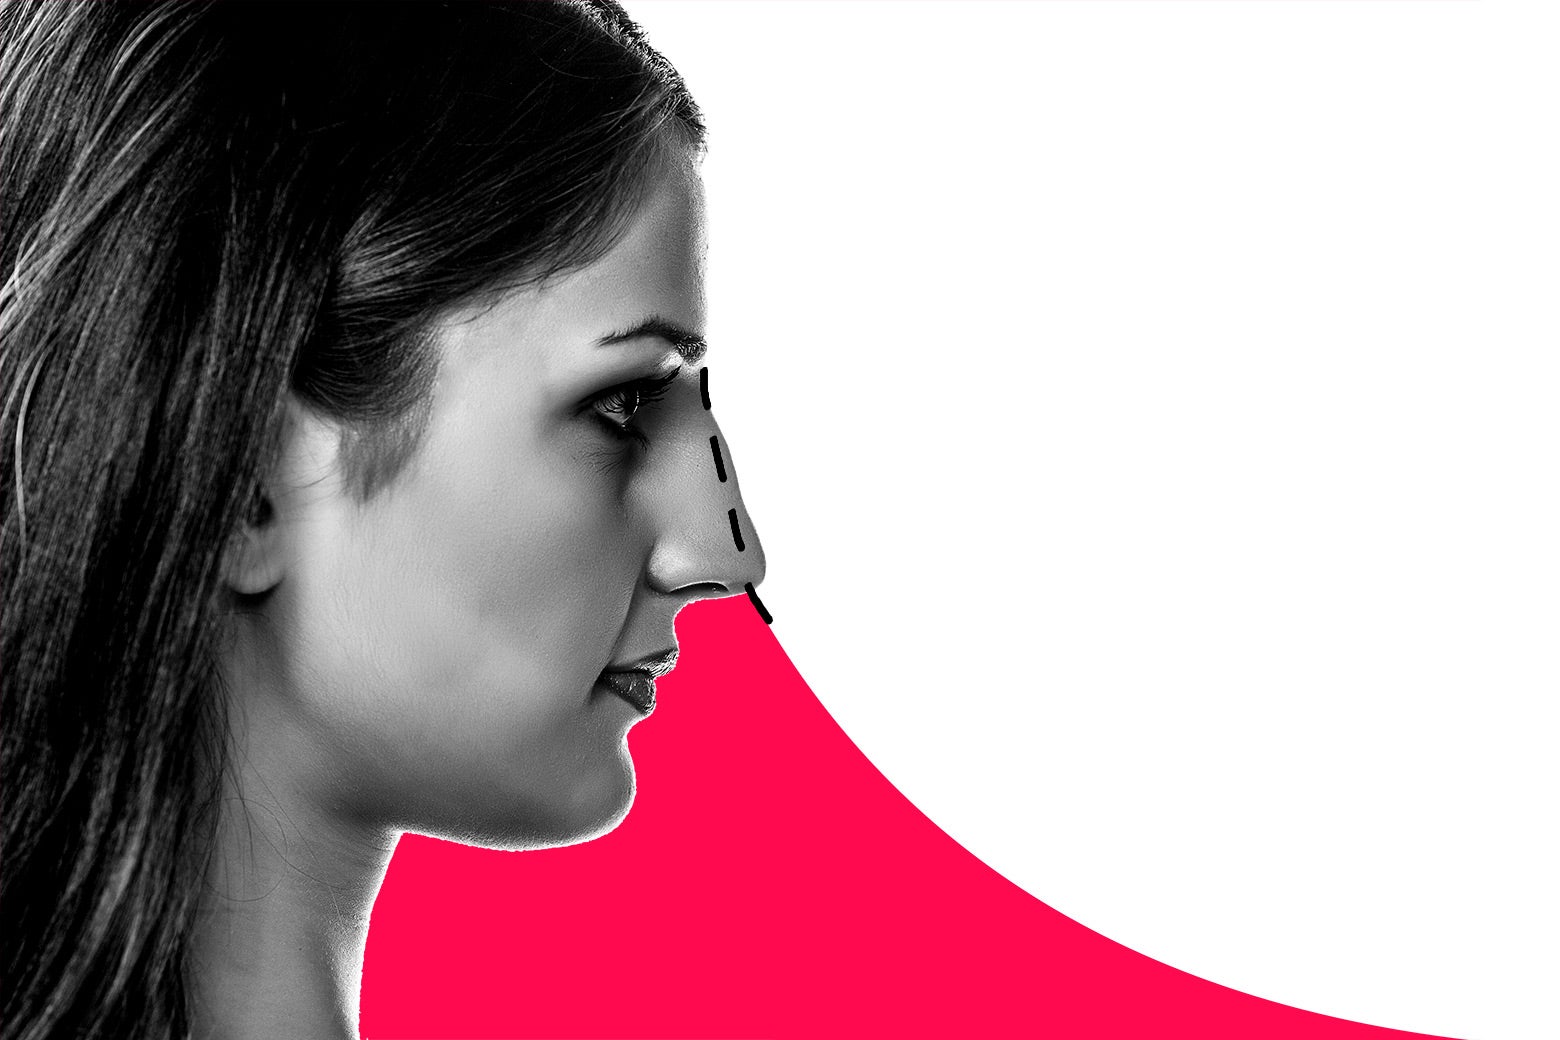 A woman's side profile with a dashed line across it.